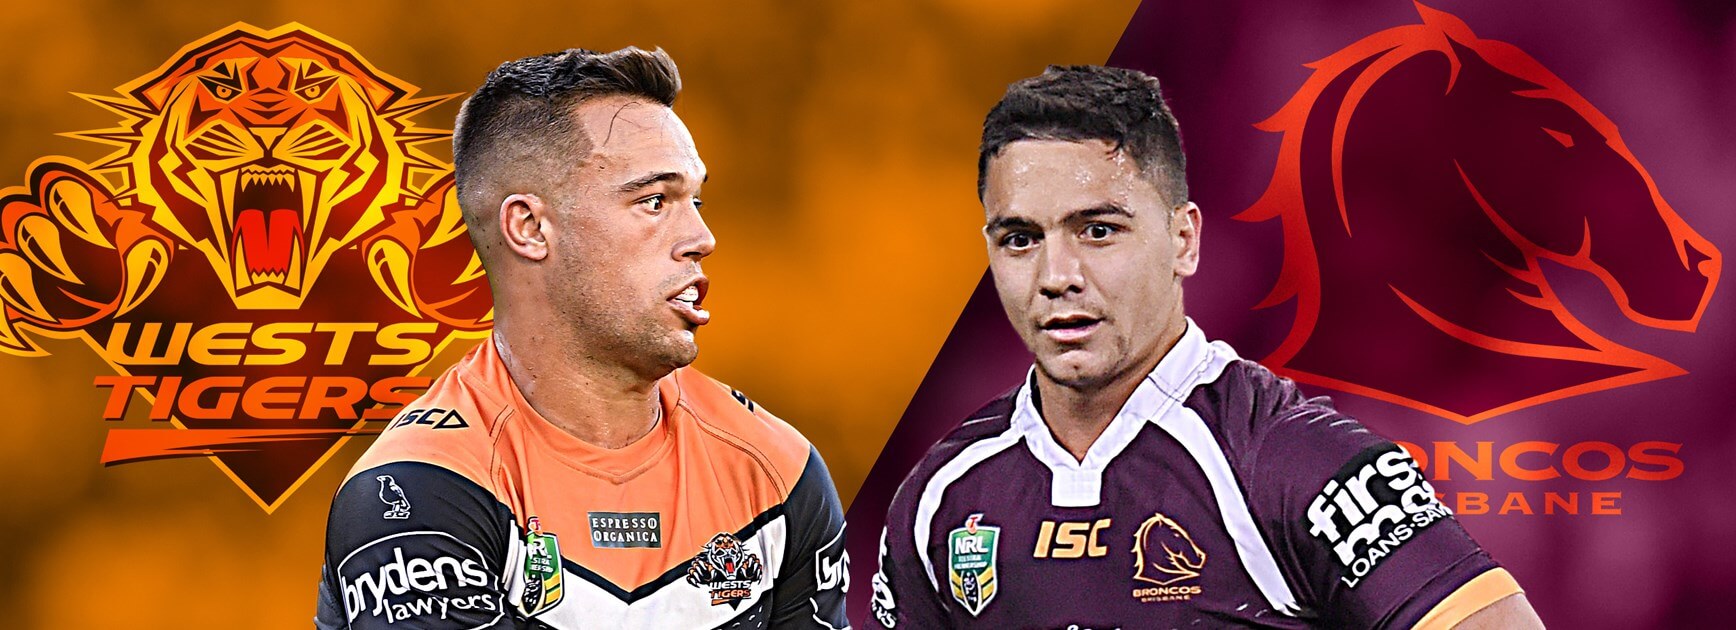 Broncos Vs Tigers Preview: Who Will Bounce Back?